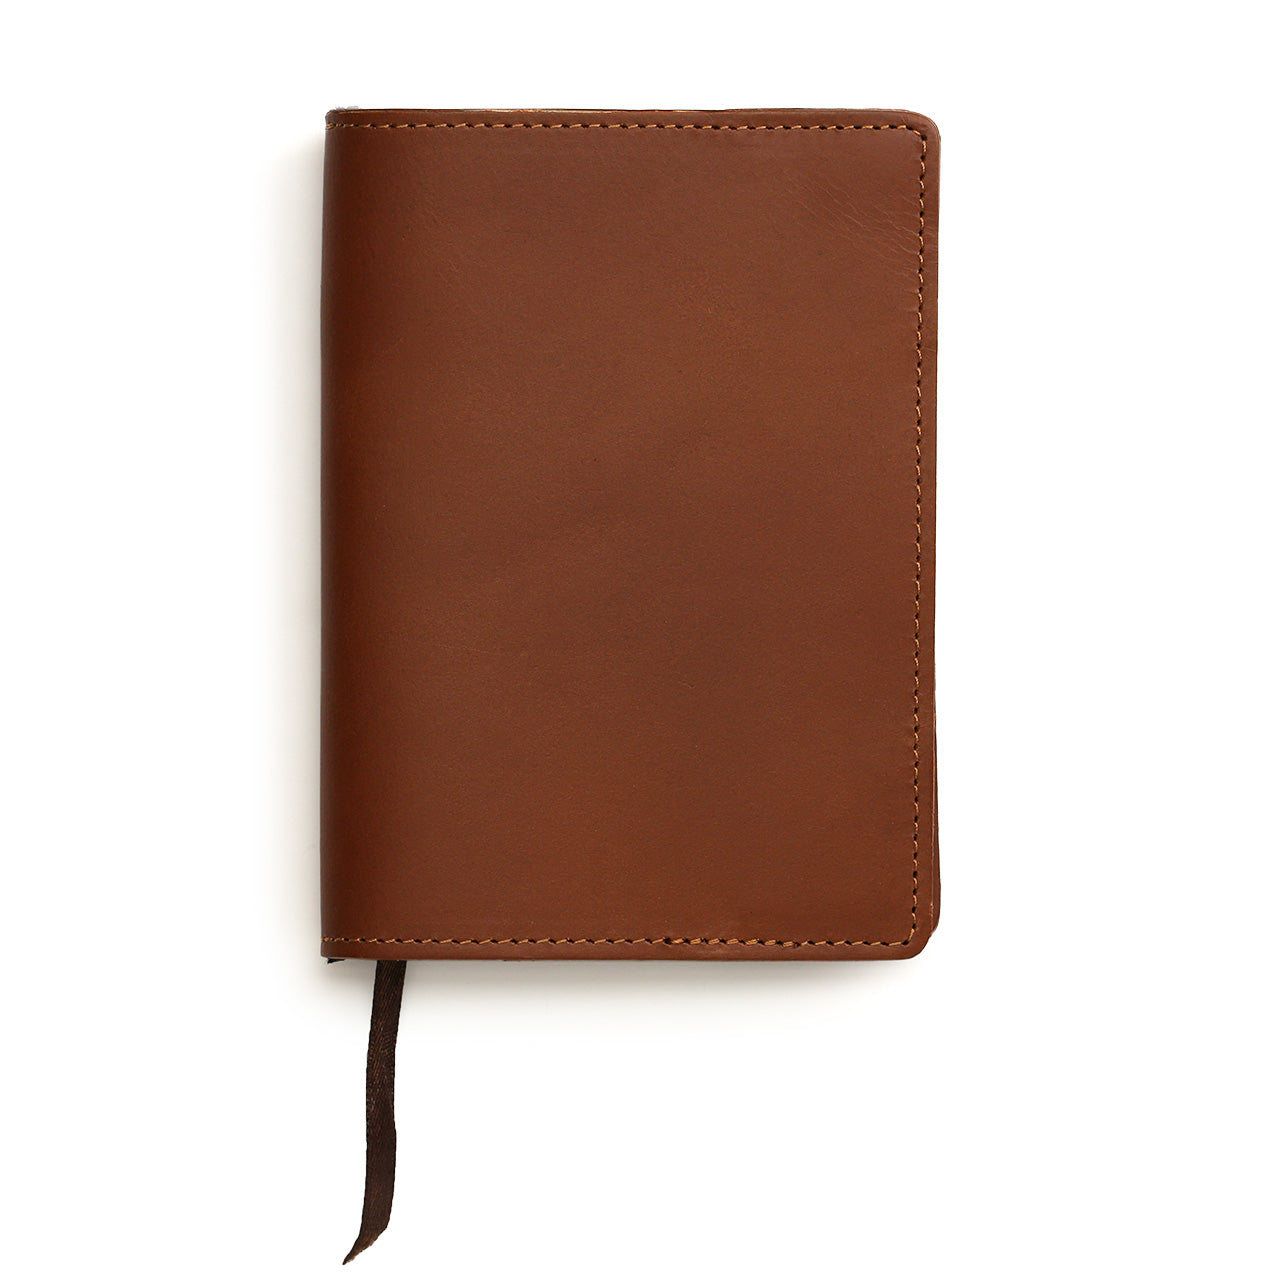 Tan leather Jacket, sized to fit A6 notebooks